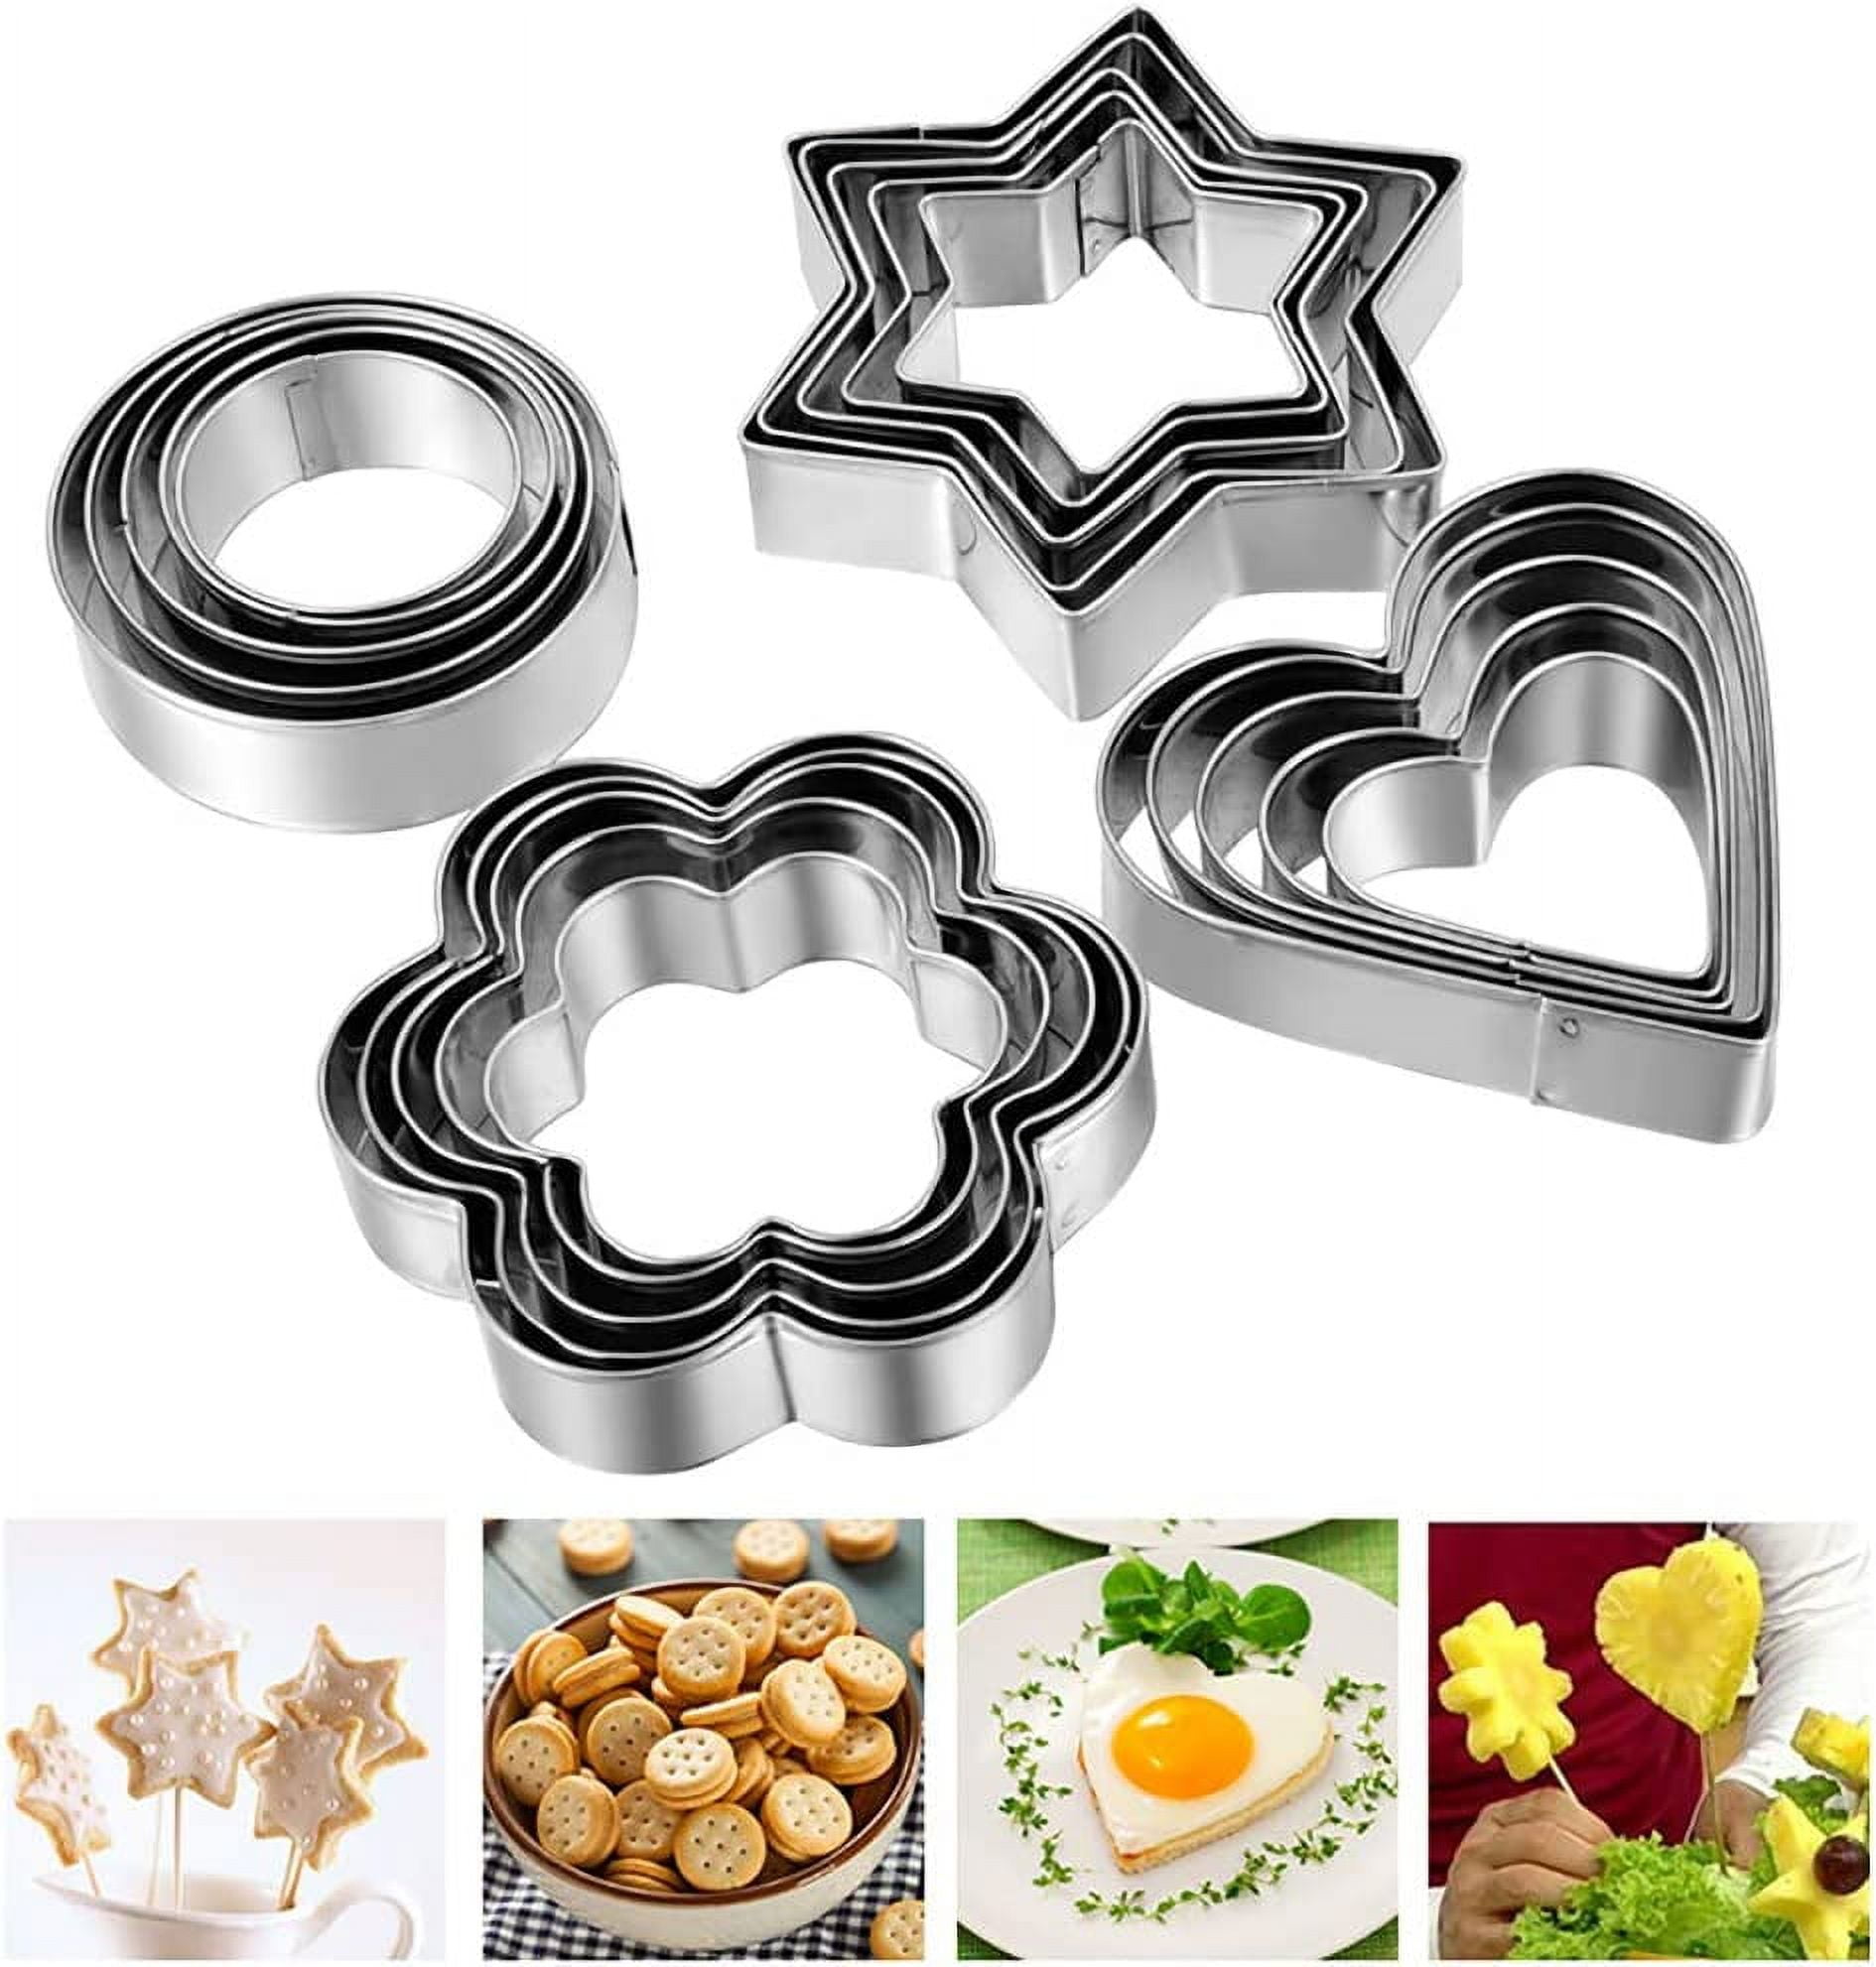 Baking Cookie Cutters Shapes Cat Mouse Giraffe Shape Biscuit Stainless  Steel Metal Molds Cutters For Rv Kitchen Baking Small Cookie Cutters